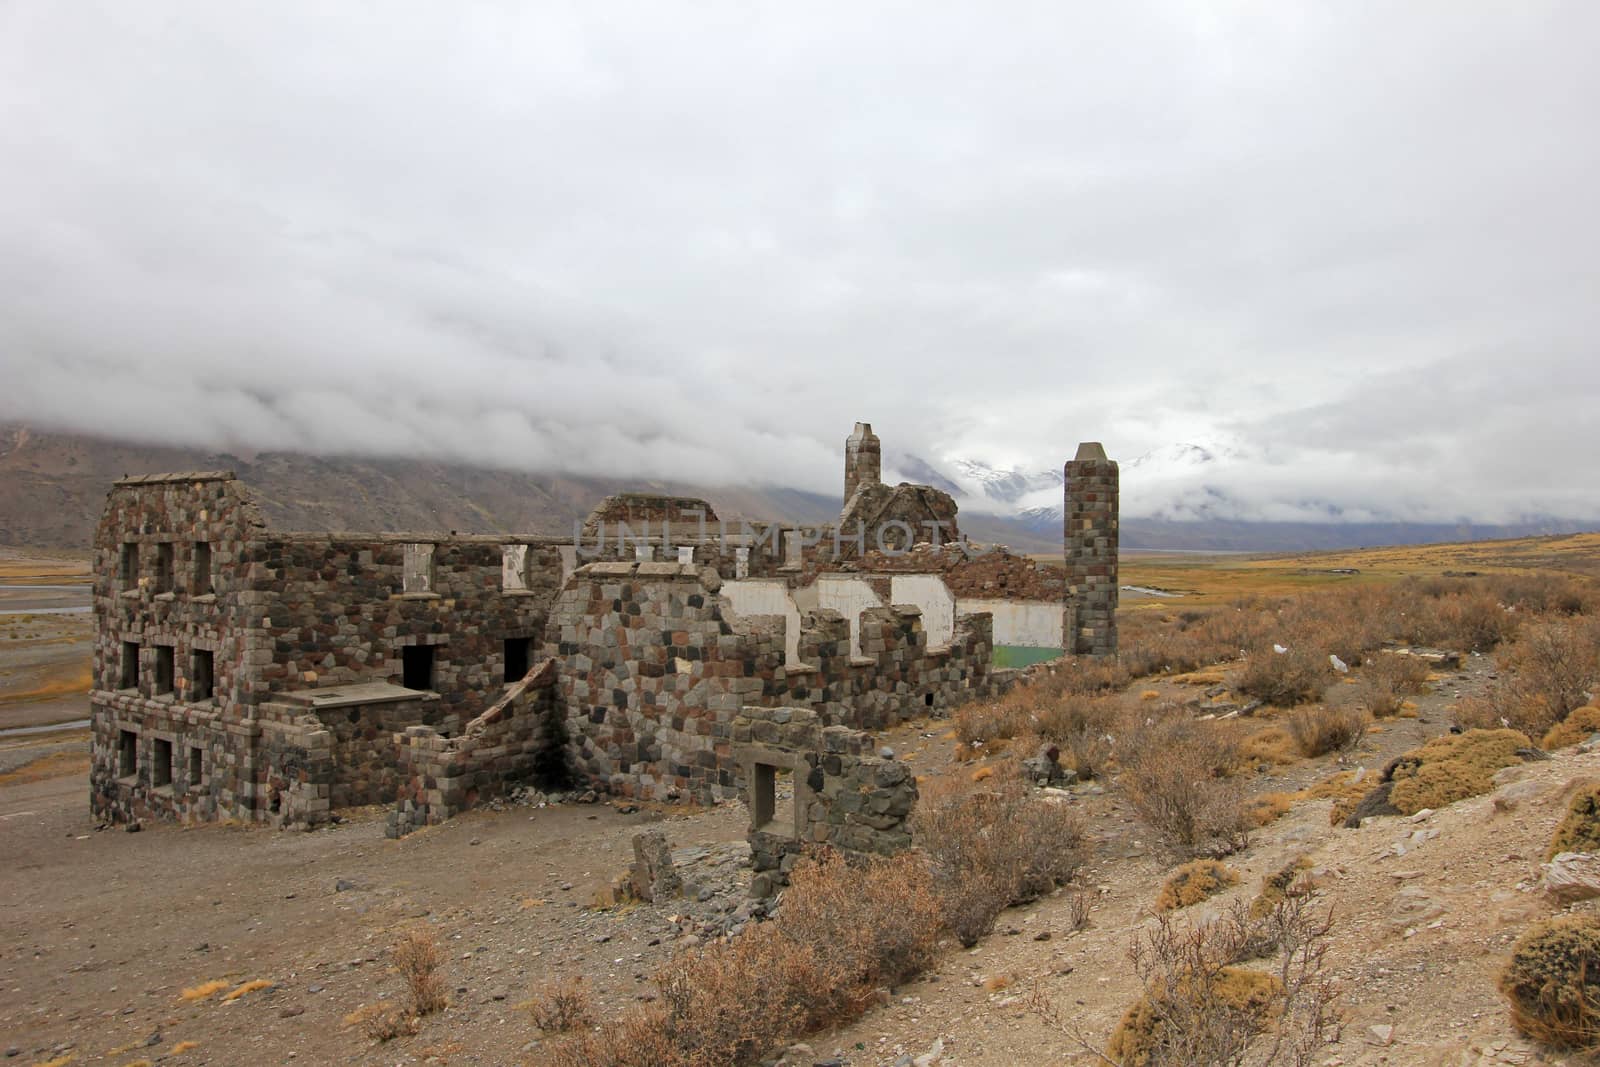 Abandoned Sosneado Hot Springs Hotel that has supposedly been a nazi hideout, Argentina by cicloco